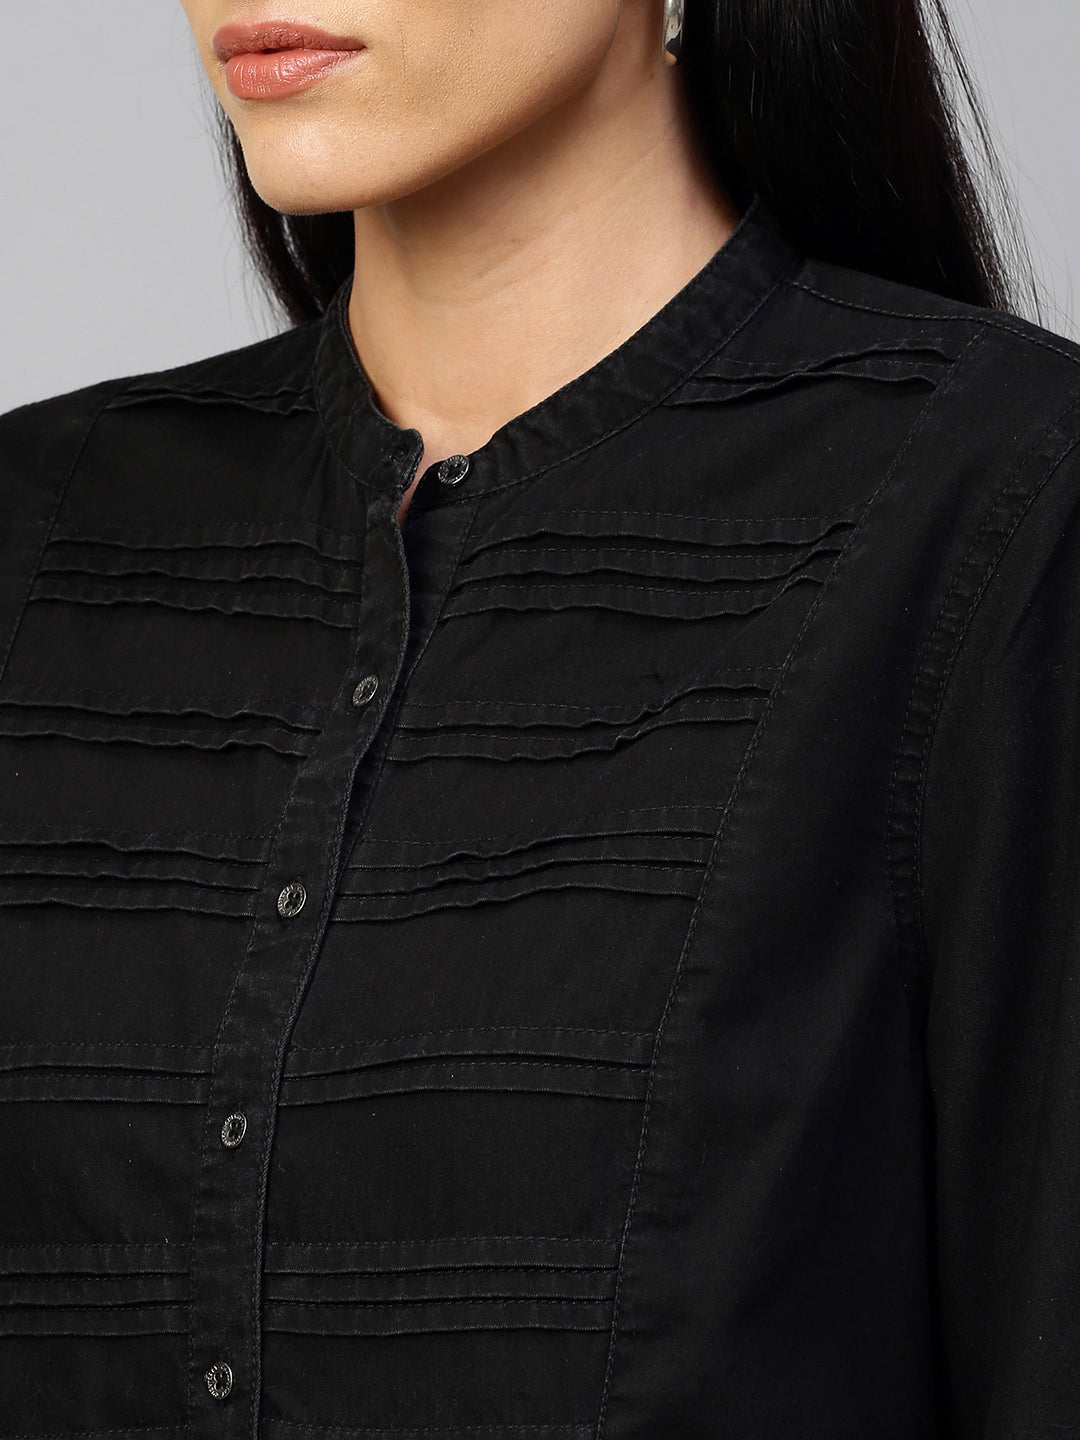 Black Denim Pleated Yoke  Top With Schiffli Embroidered Sleeves